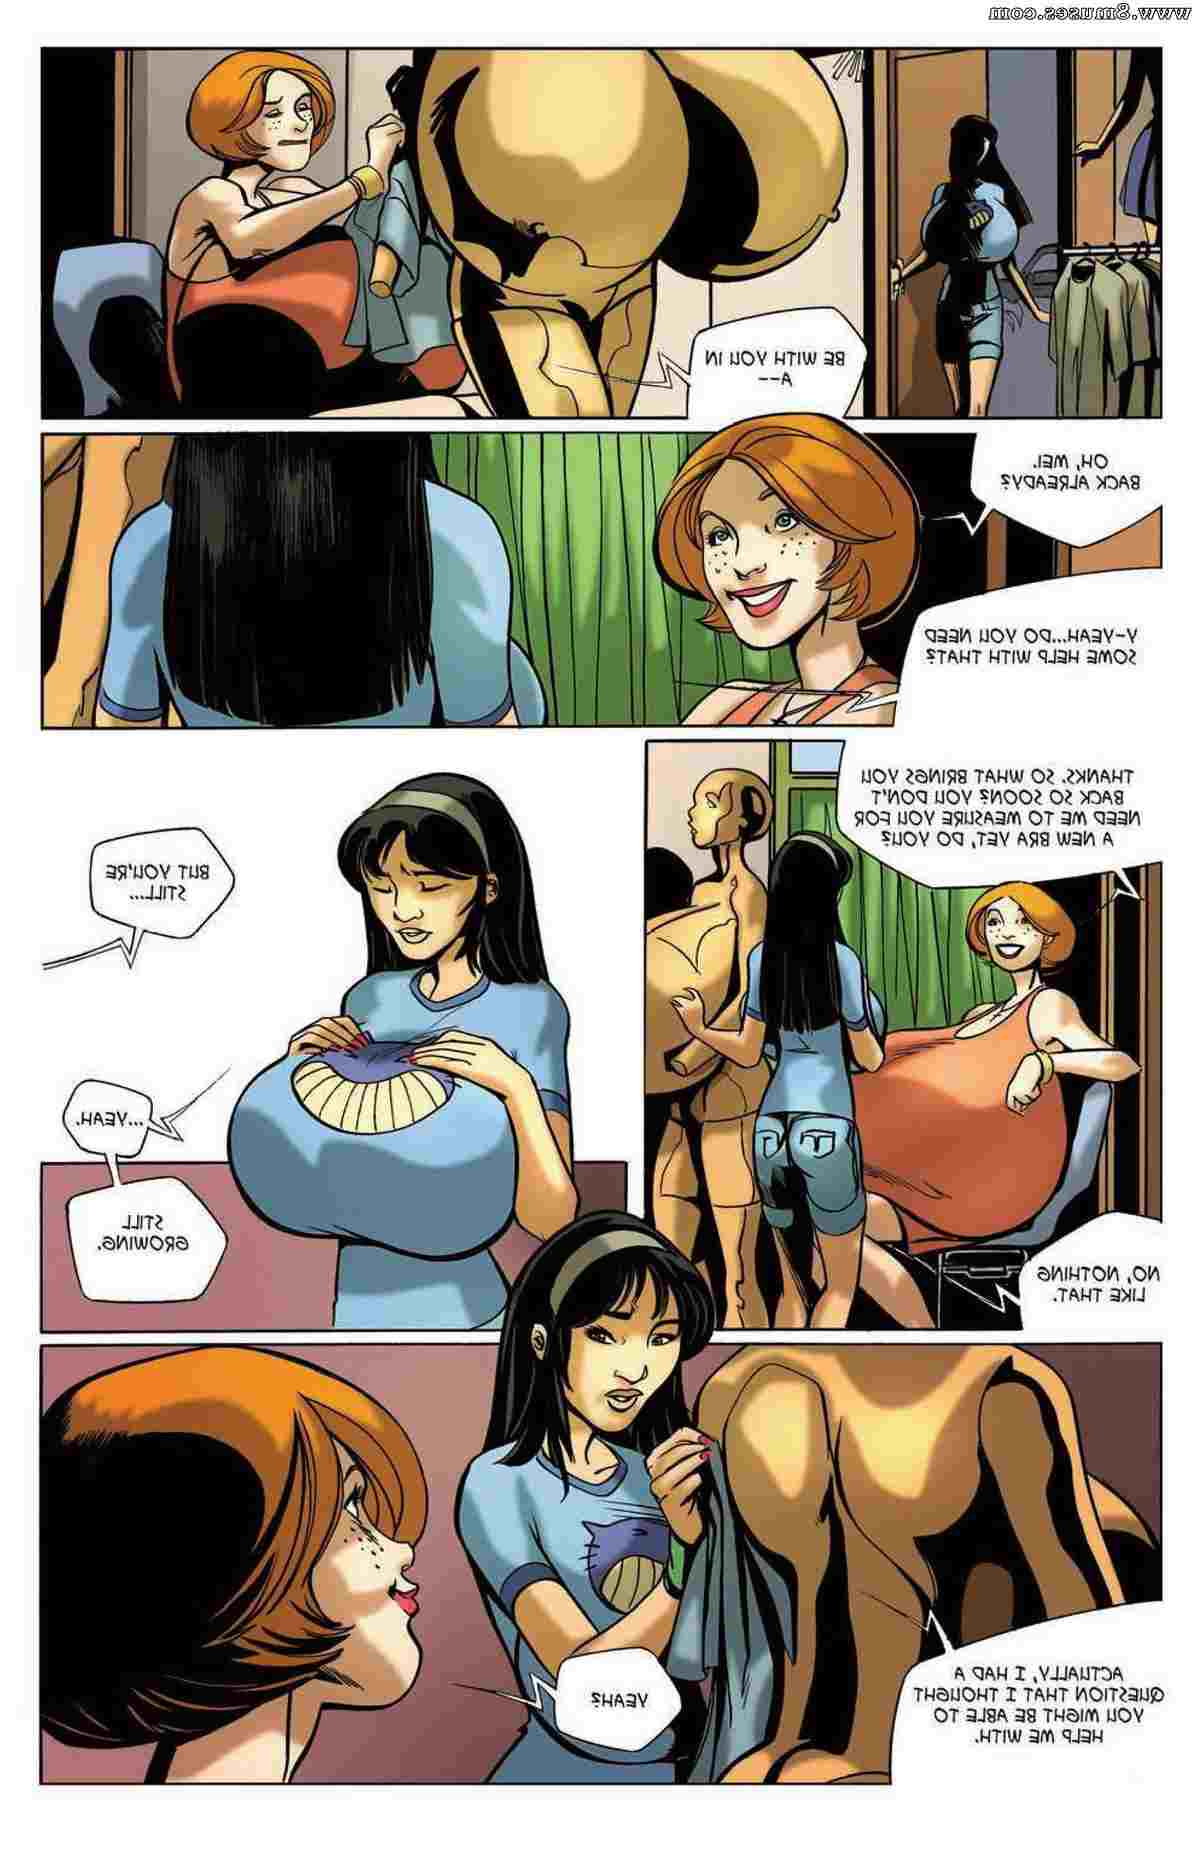 BE-Story-Club-Comics/Welcome-to-Chastity Welcome_to_Chastity__8muses_-_Sex_and_Porn_Comics_38.jpg